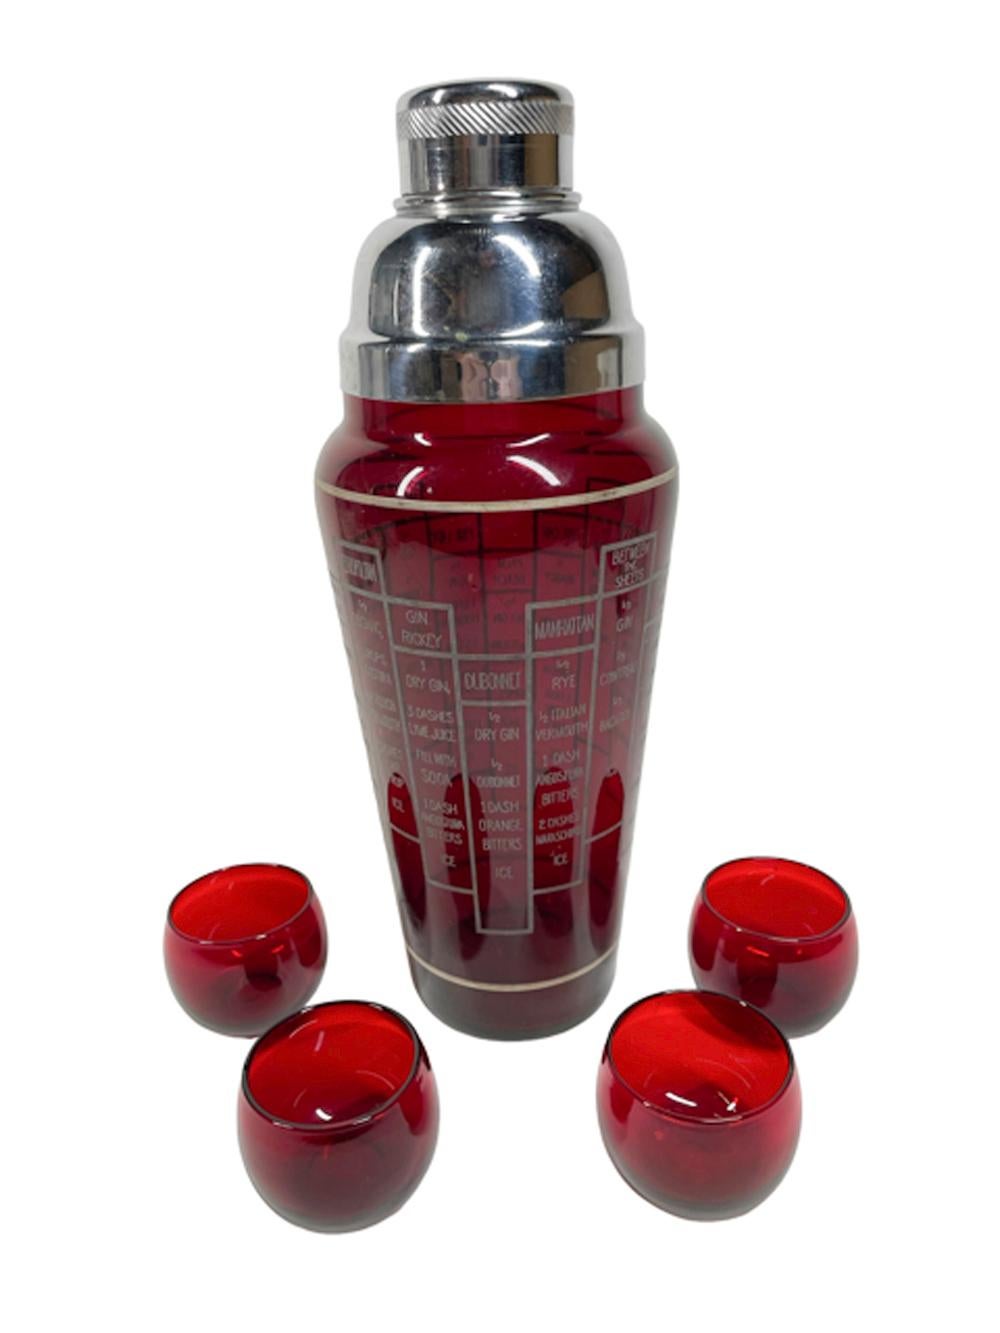 Art Deco ruby glass cocktail shaker with 16 cocktail recipes in white graphics on the tapered shaker, the 2 part domed chrome lid is fitted with an integral strainer. Together with four roly poly cocktail glasses.